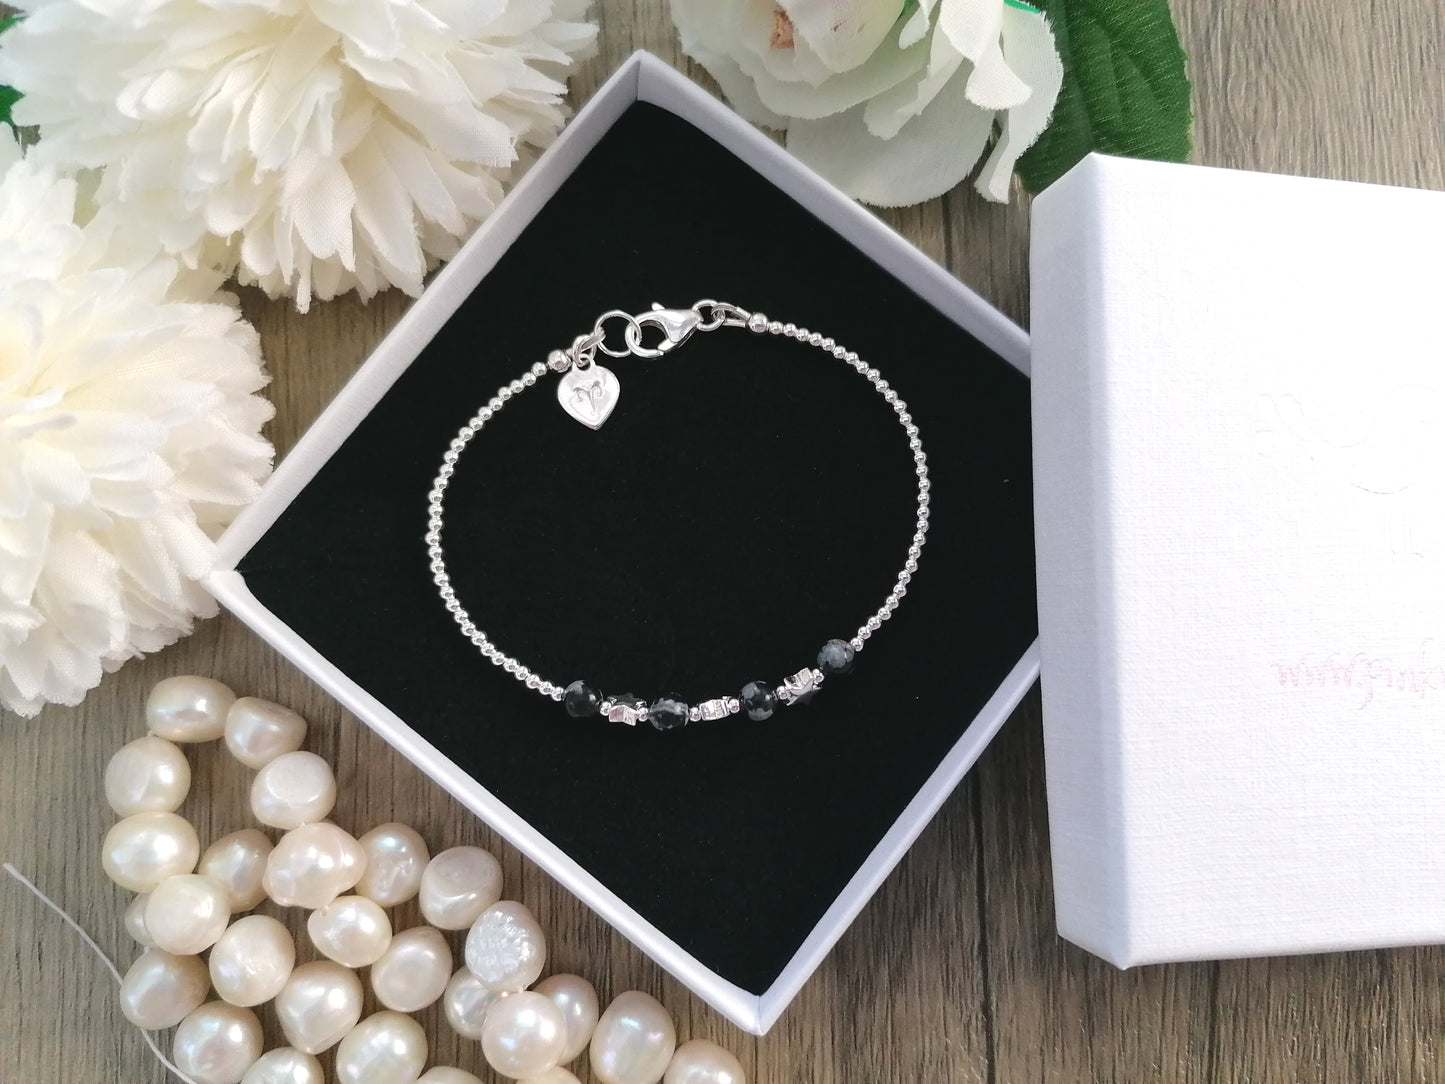 Snowflake obsidian bracelet in sterling silver with optional personalised tag - initial, number or zodiac sign.